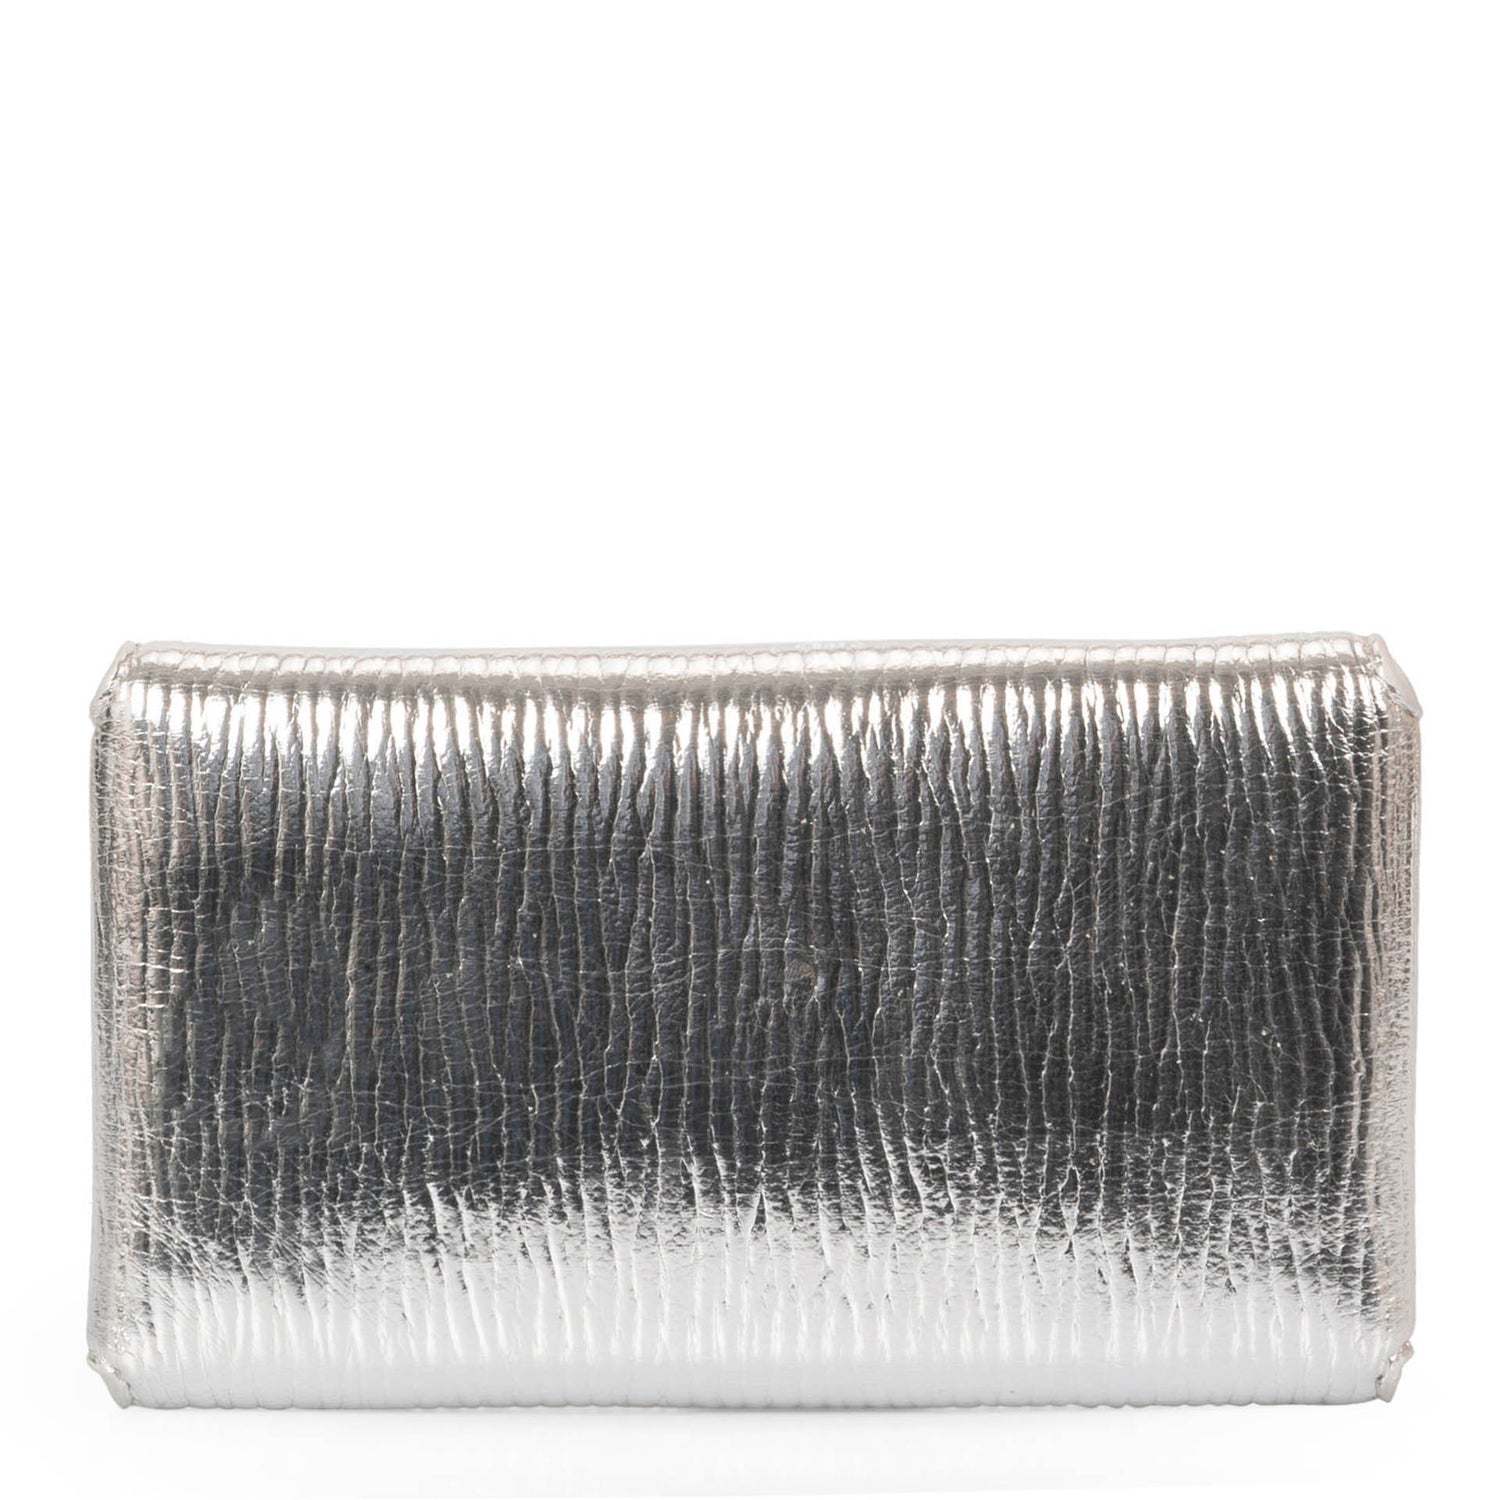 Back view of metallic silver coloured vegan crossbody bag called Evening in an envelopy style designed by Riona, showcasing its shiney textured PU look.